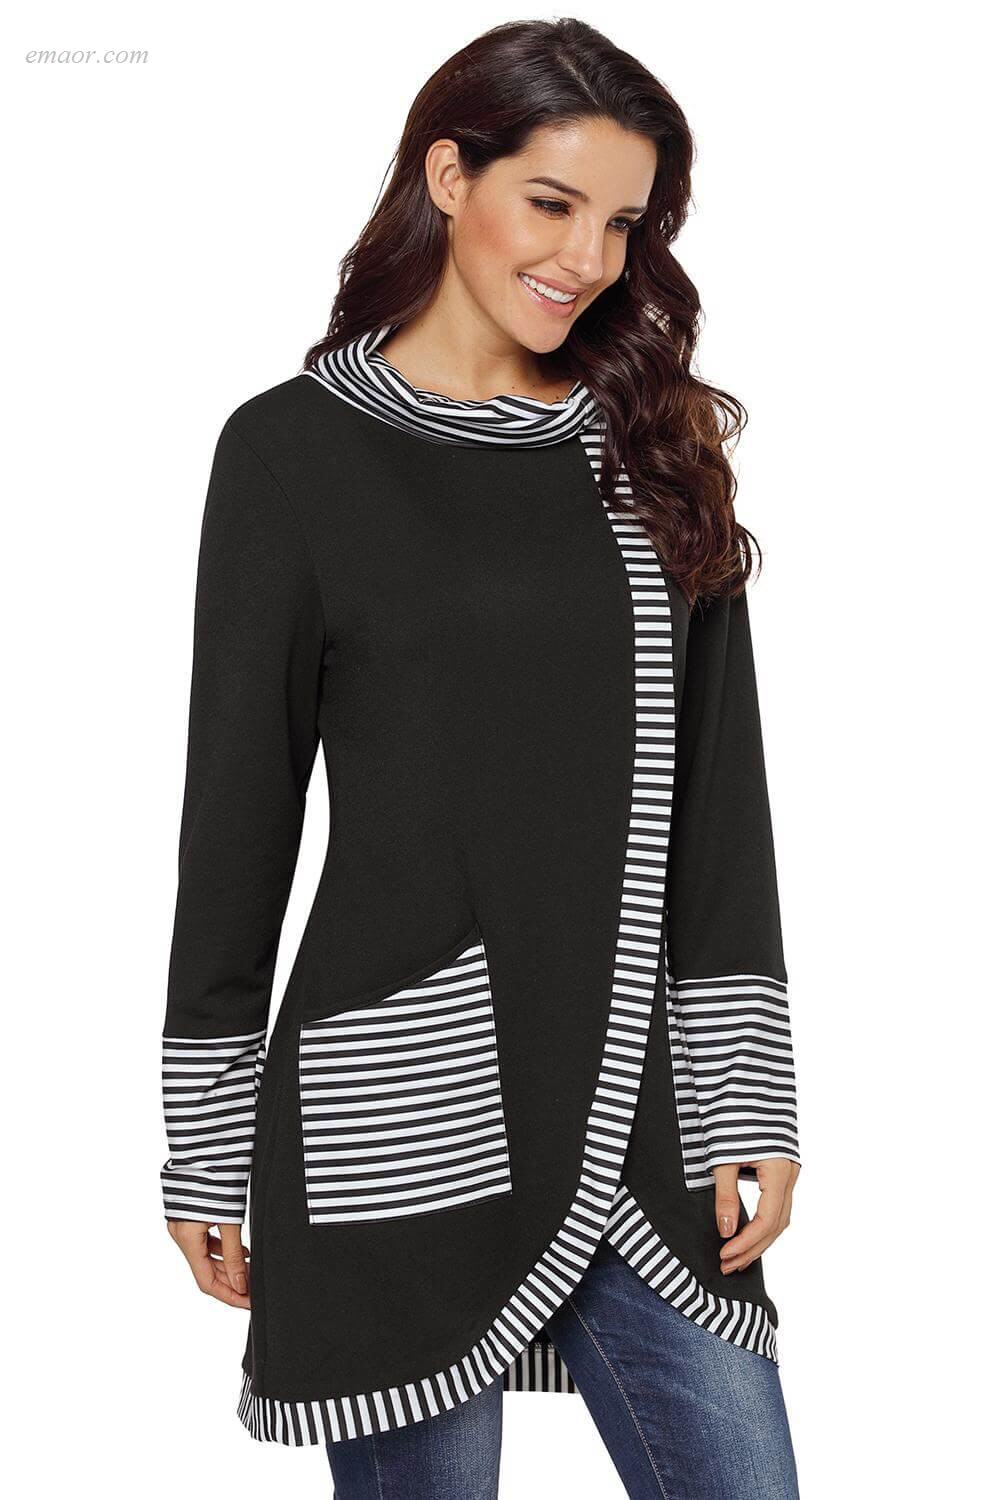 Wholesale Outerwear on Sale Striped Cowl Neck Top Free Country Outerwear Coupons Gallery Plus Size Outerwear